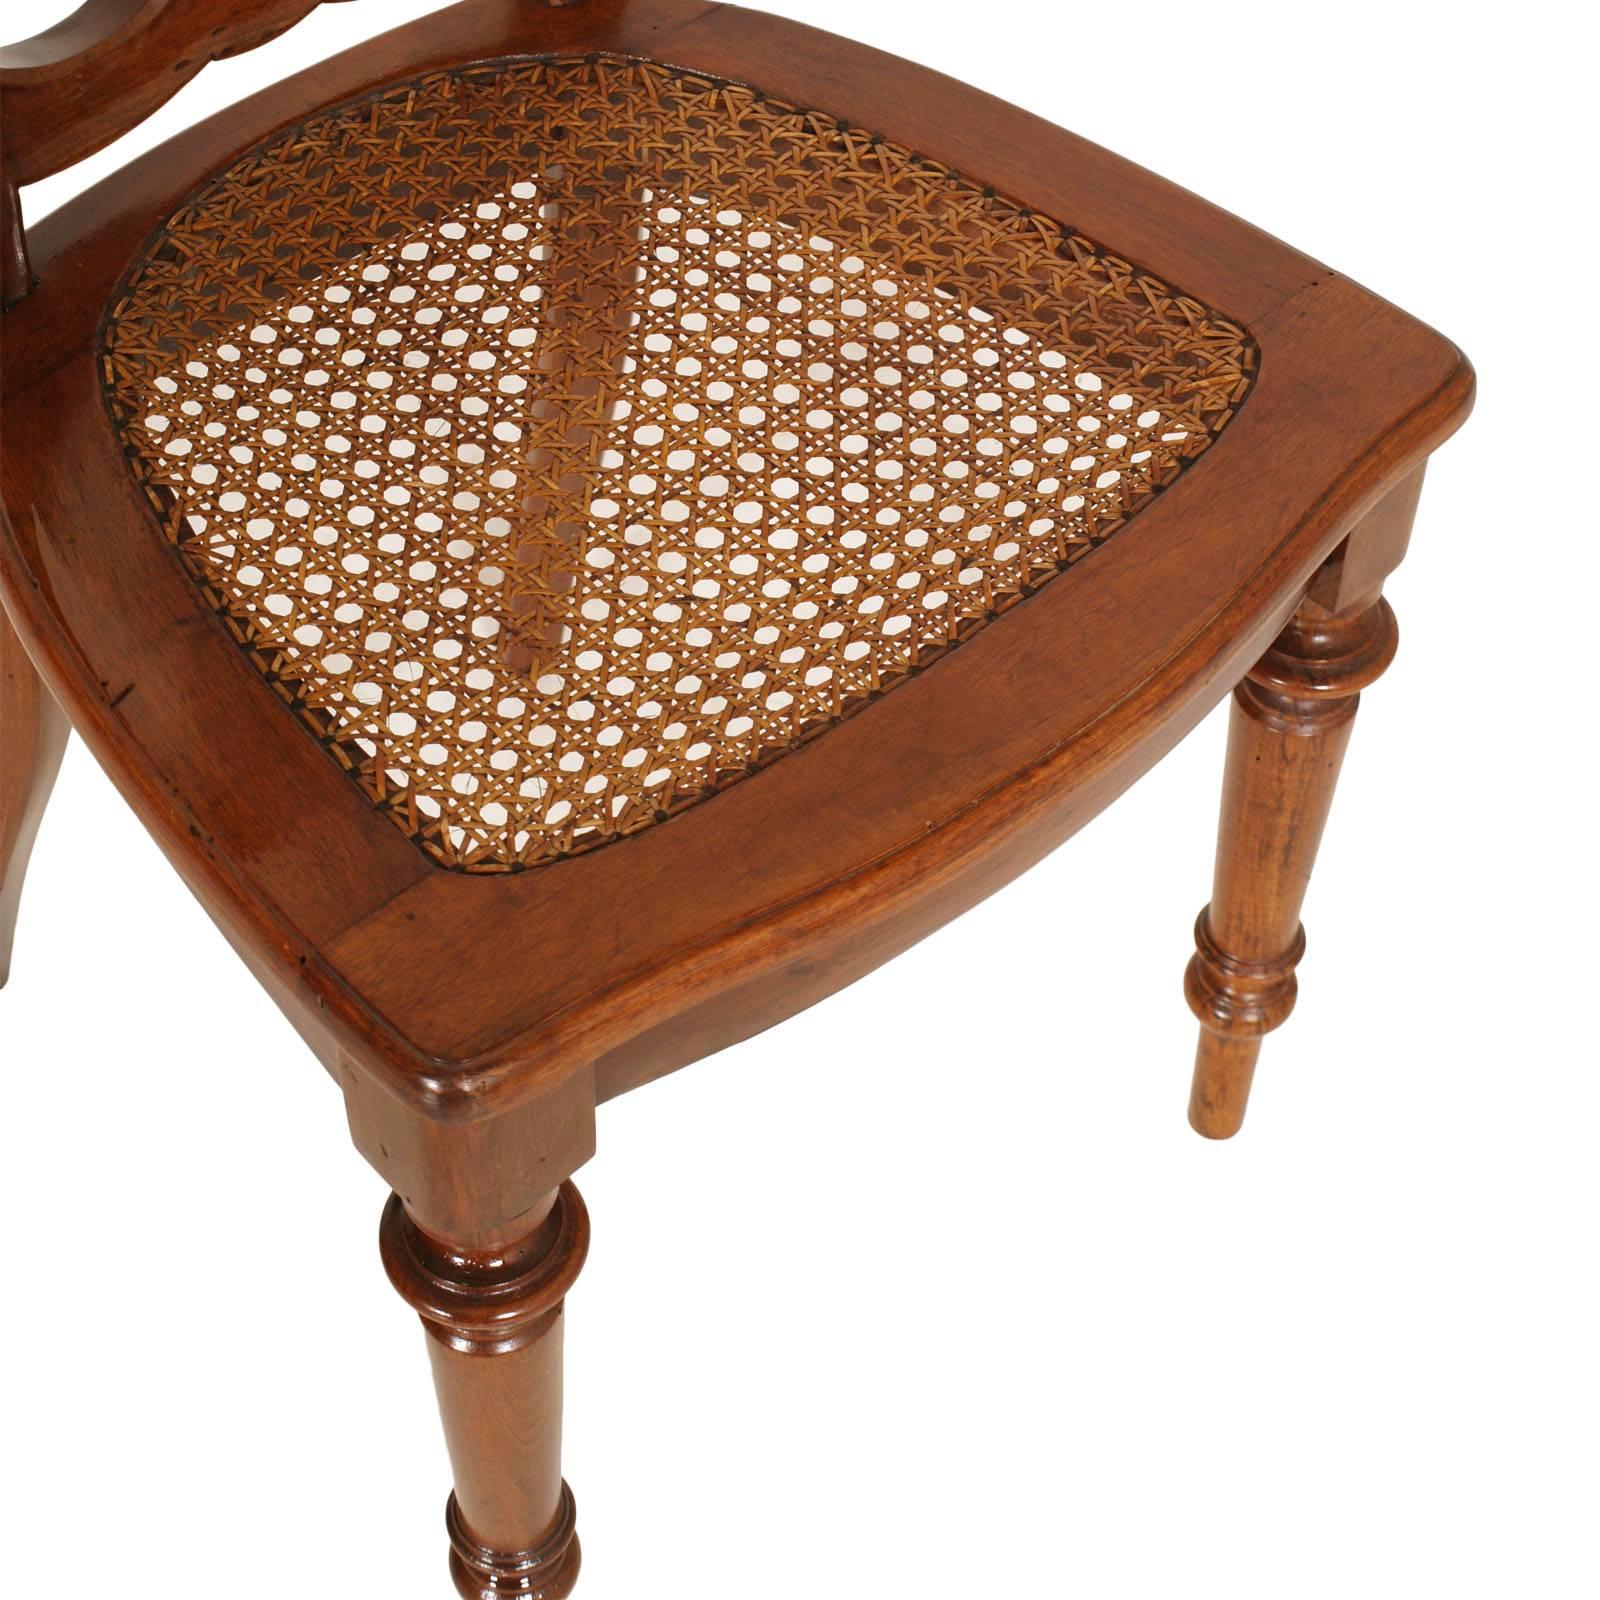 Straw 19th Century Table & Chairs Renaissance Baroque Style Solid Walnut Restored For Sale